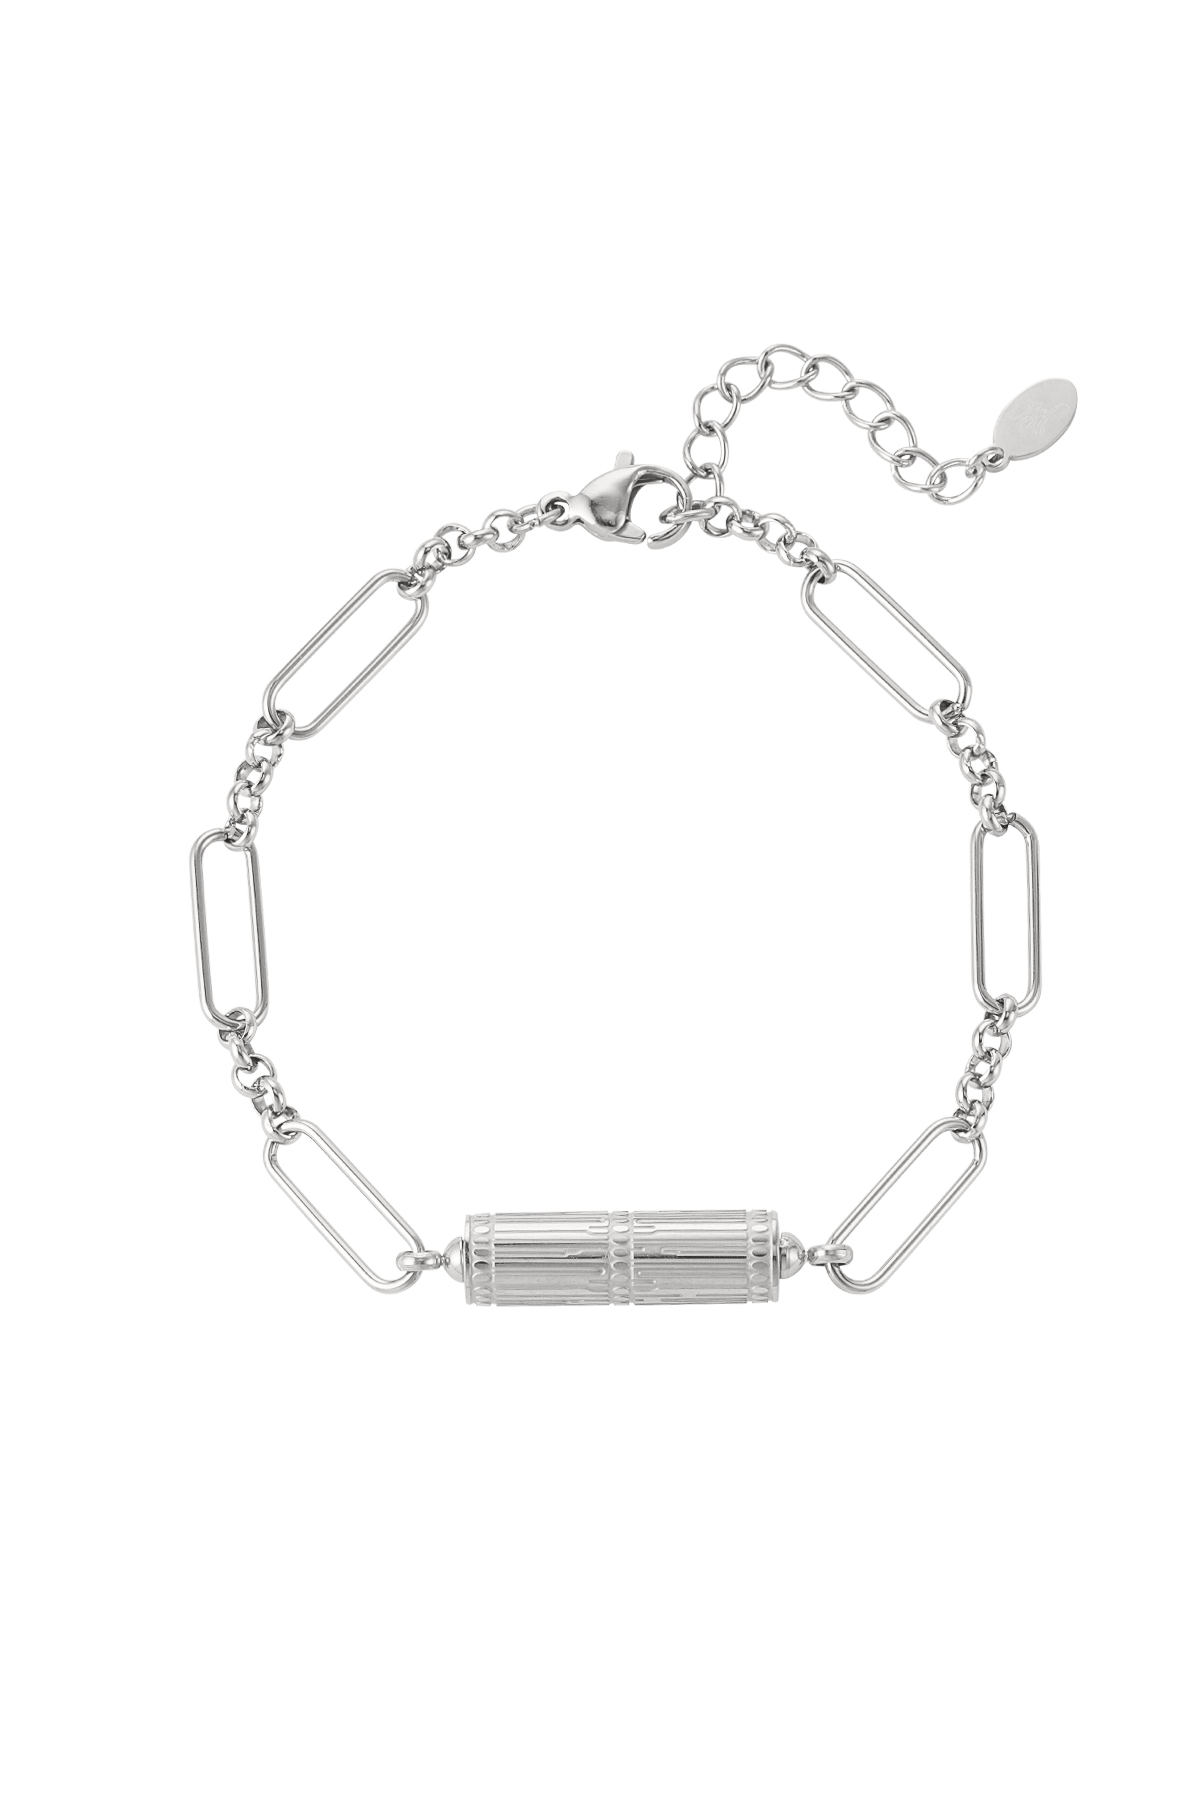 Link bracelet with charm - silver Stainless Steel